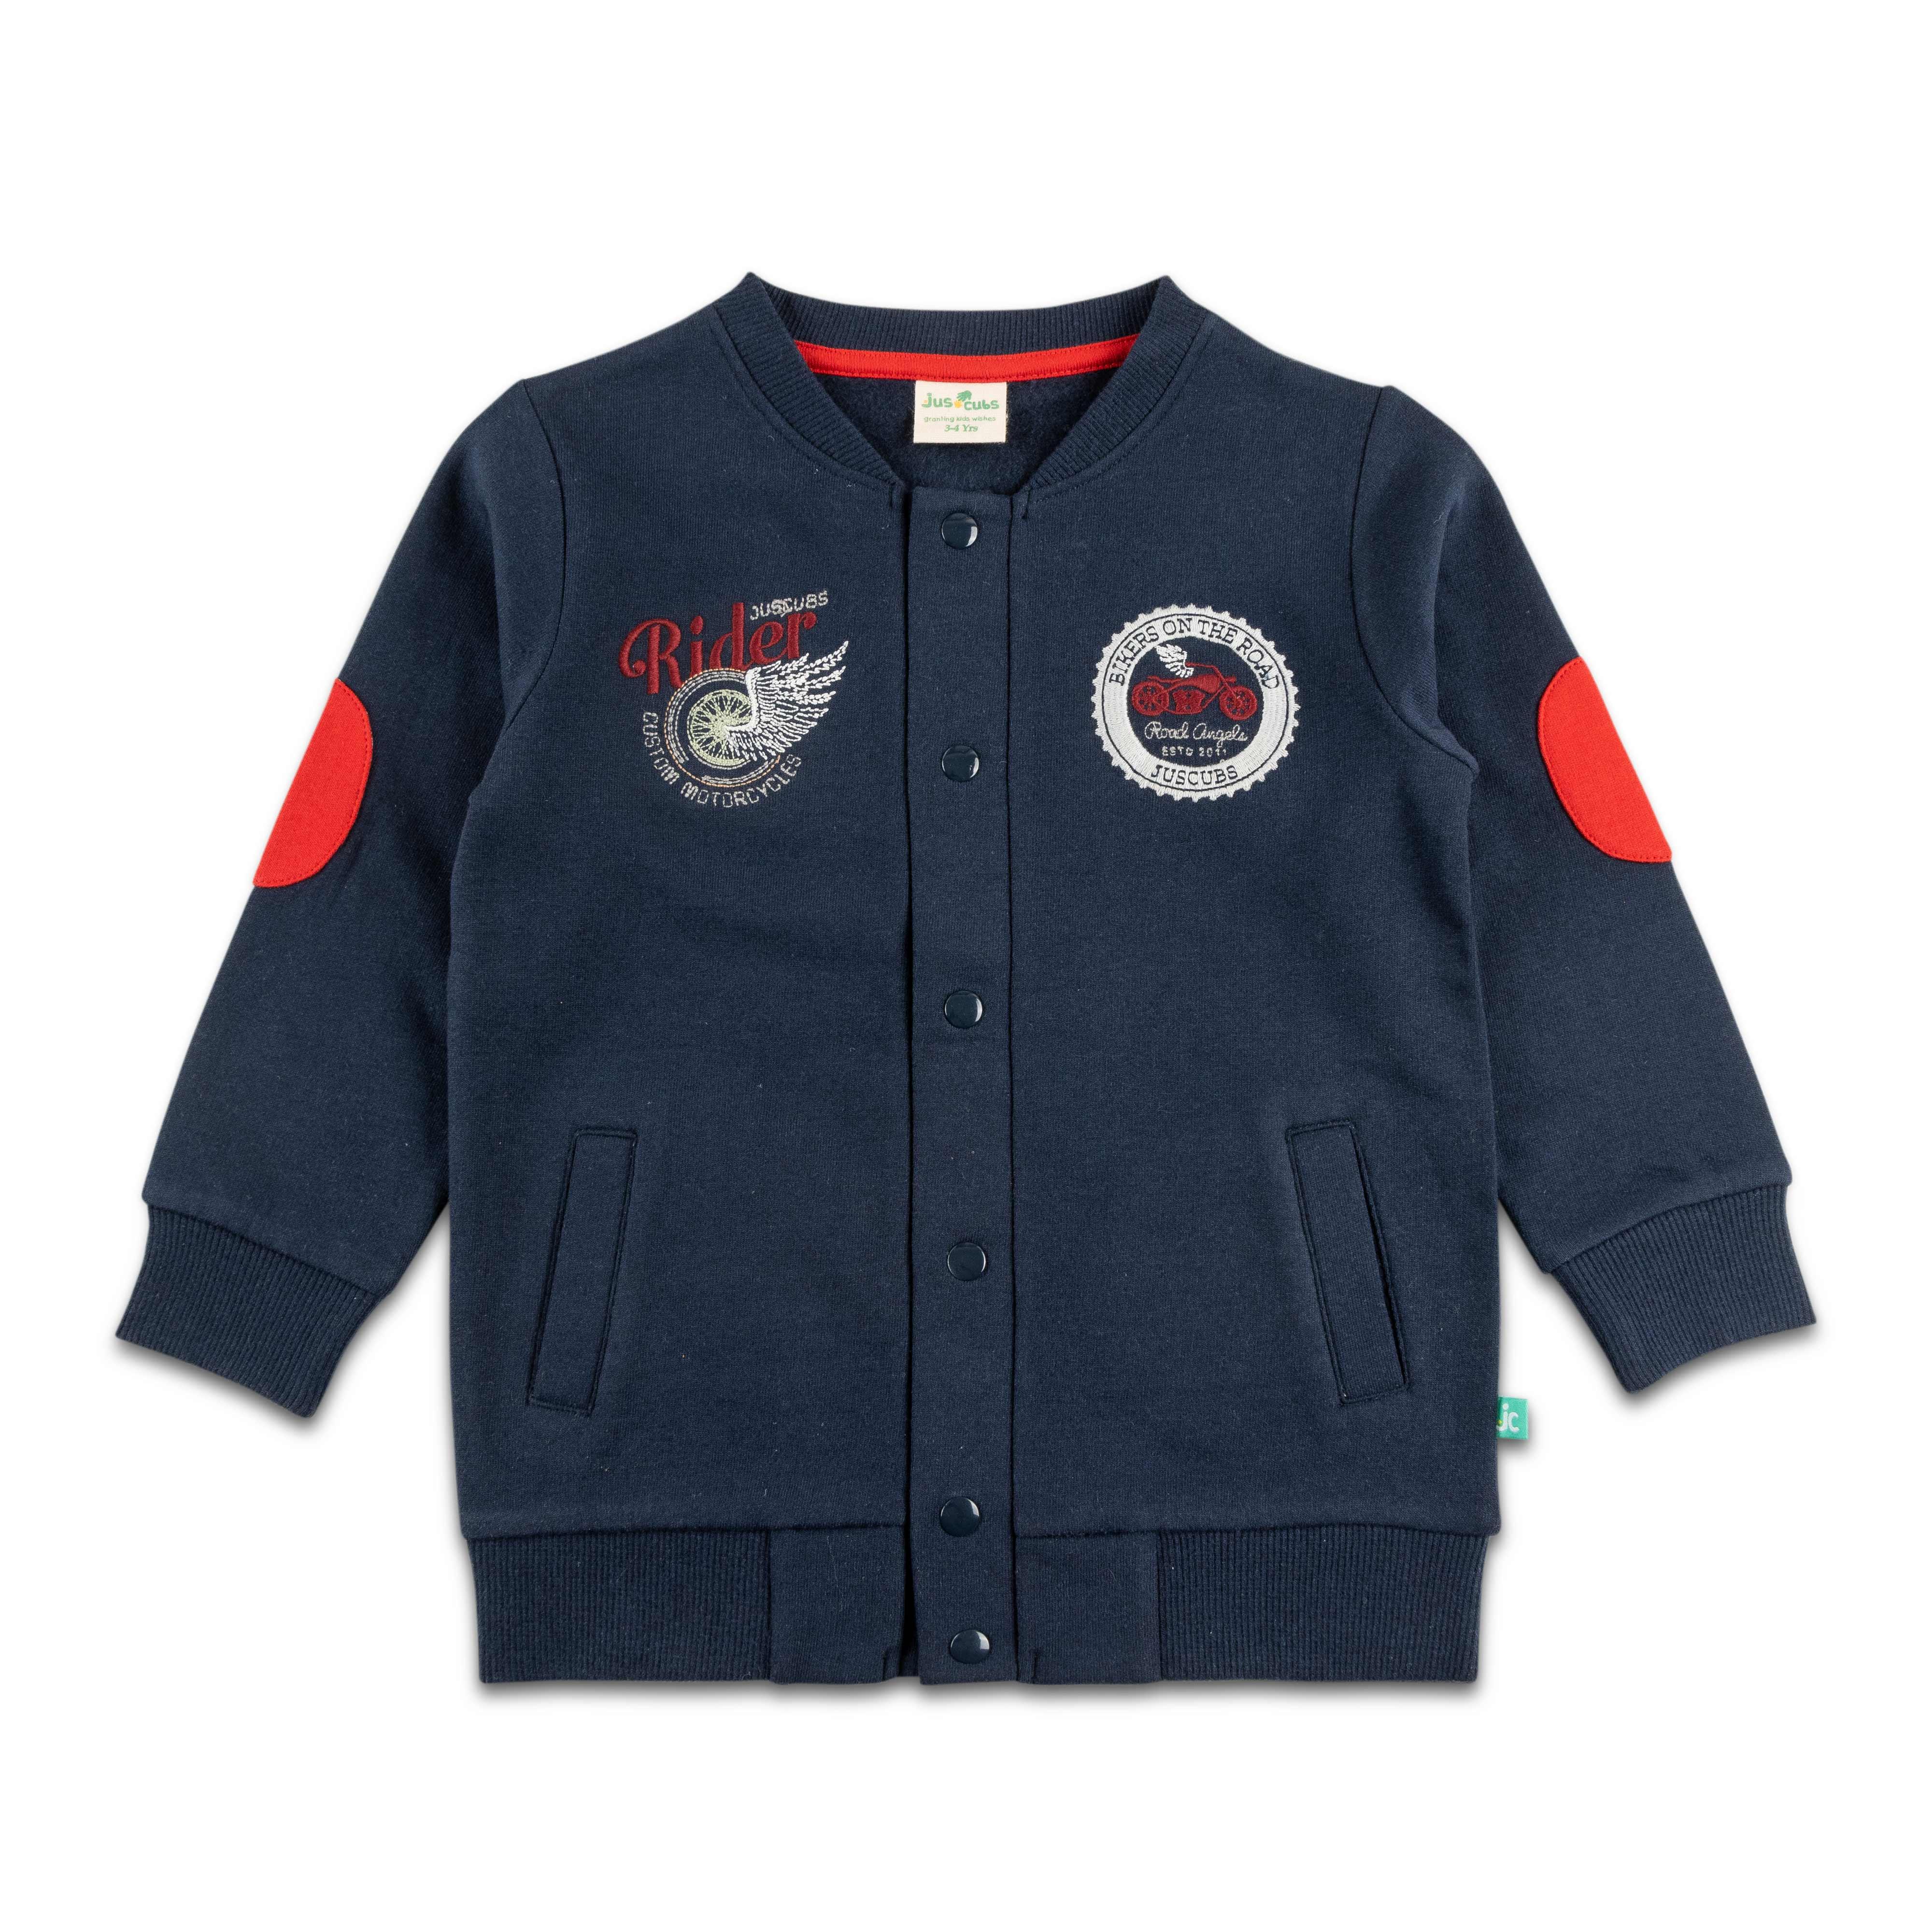 Young Boys Full Sleeve Rider Embroidery Jacket - Juscubs